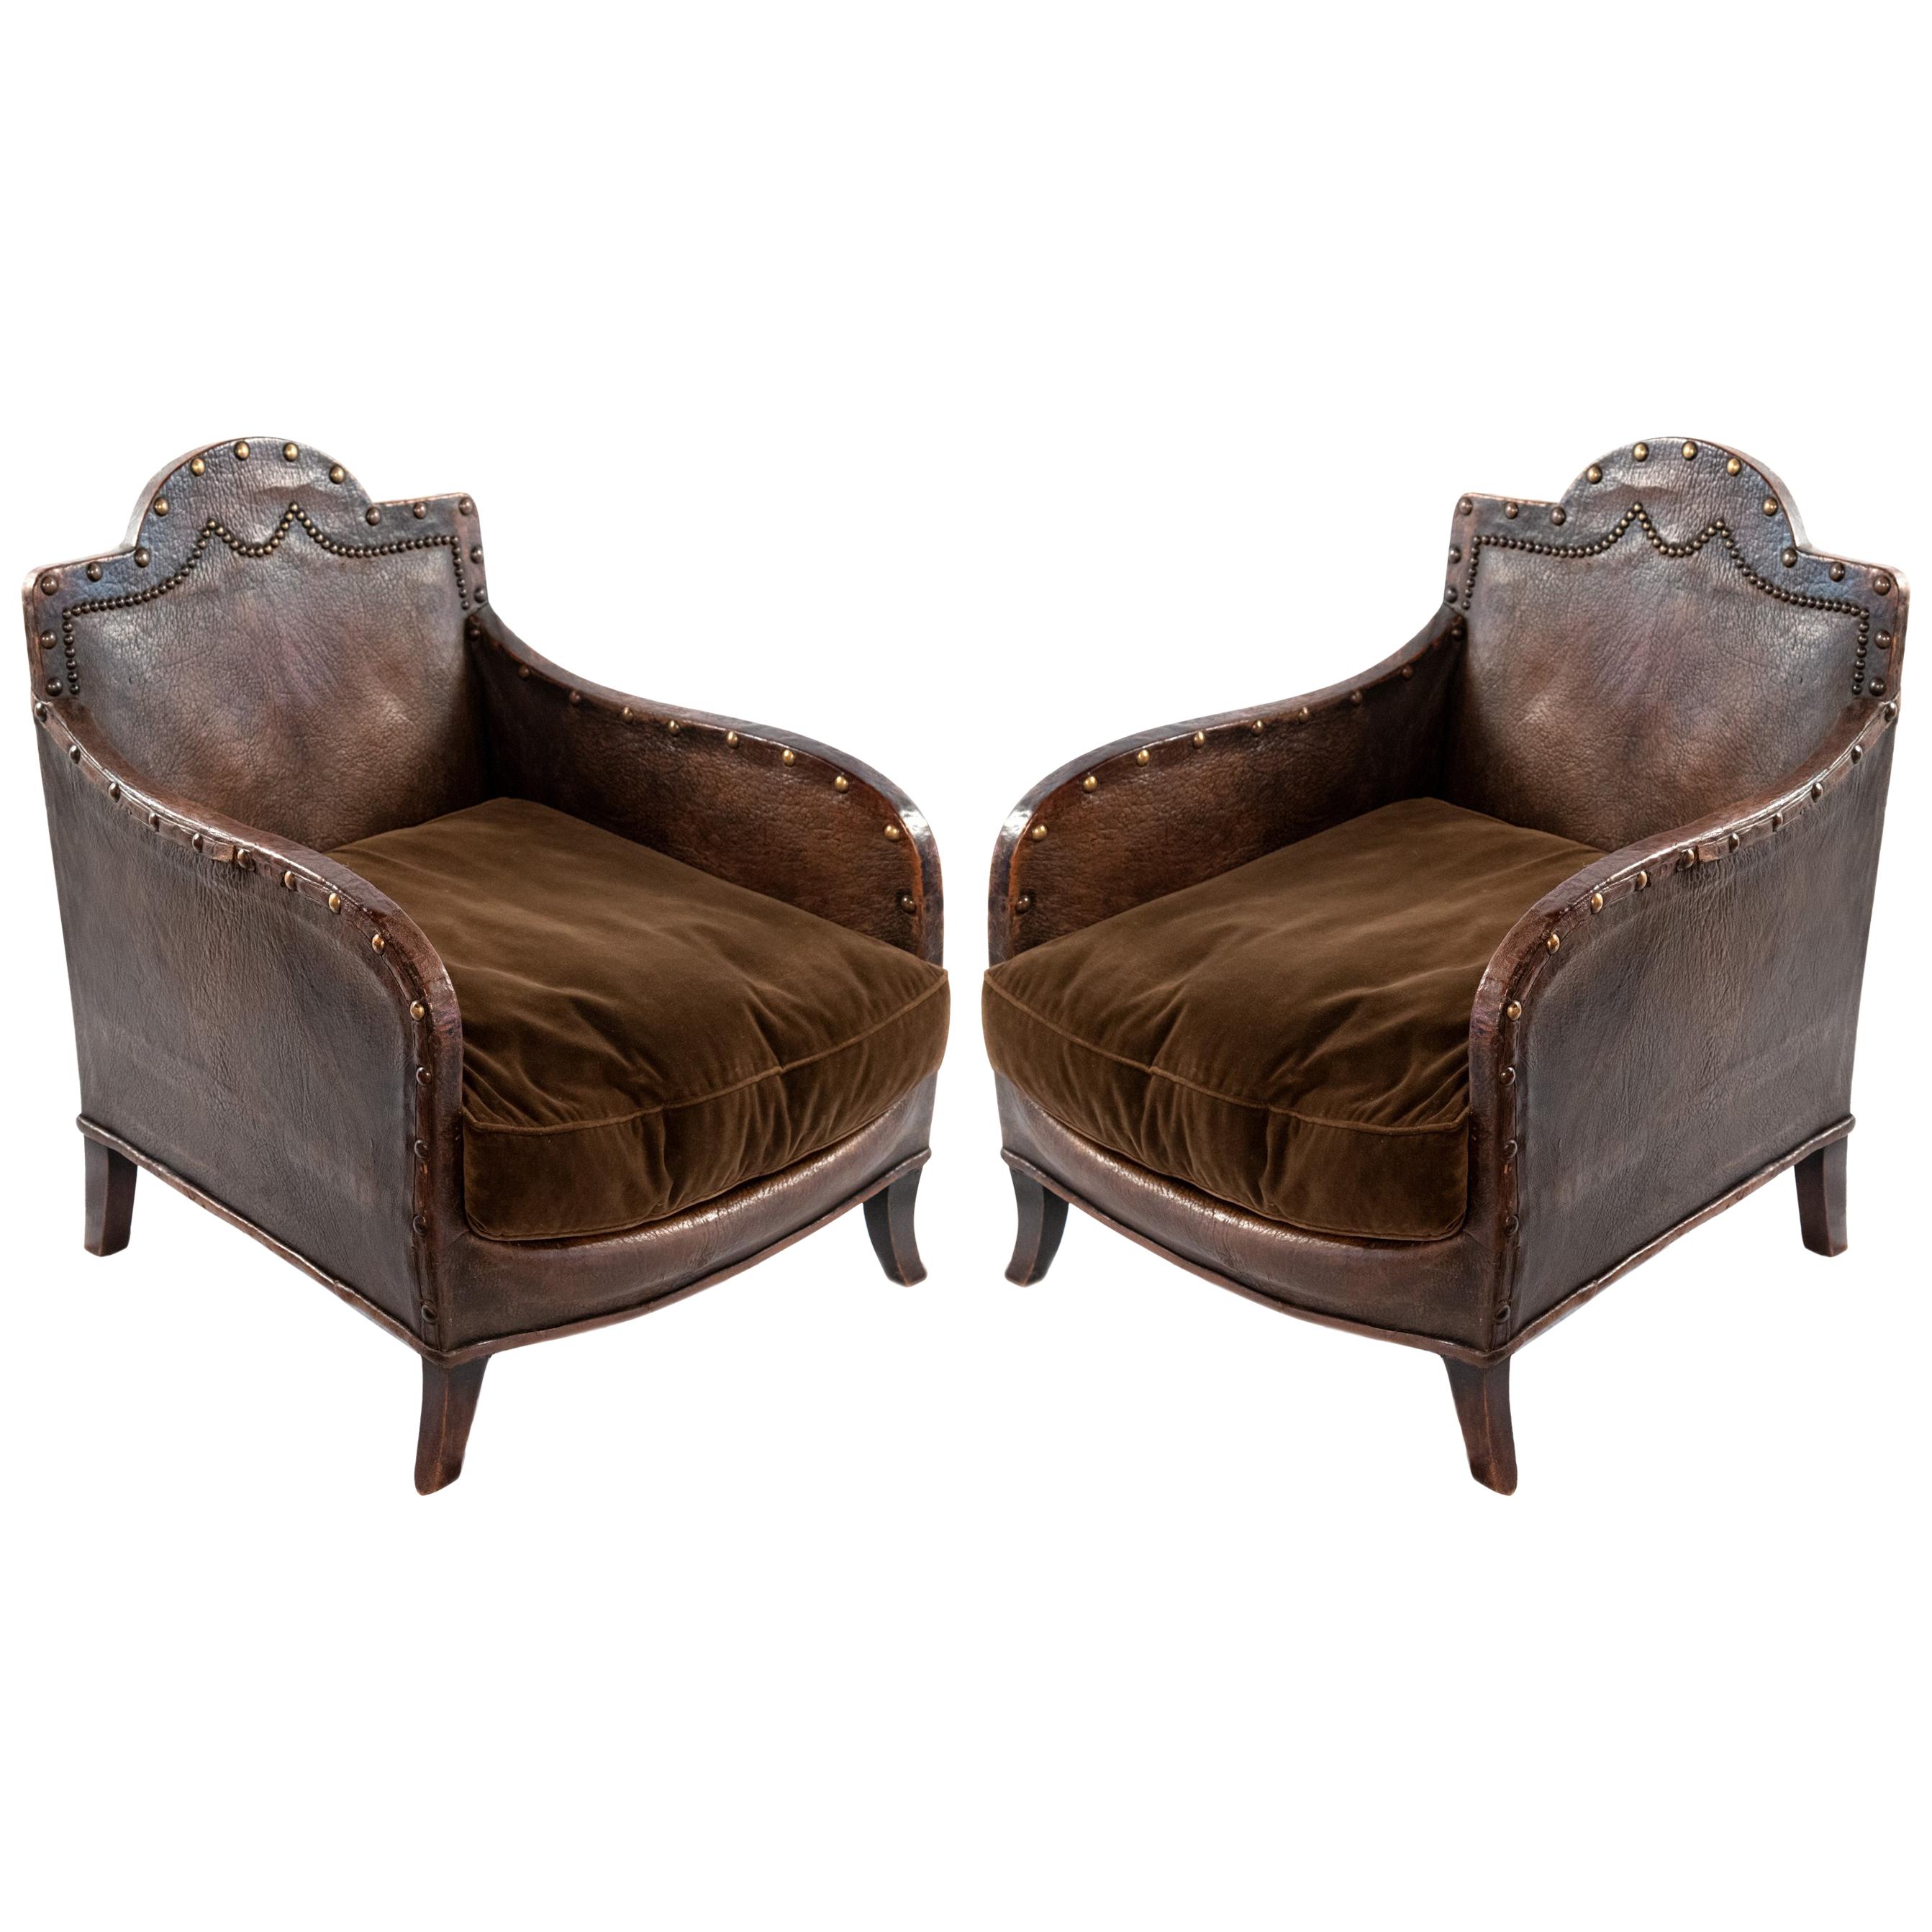 Pair of French Club Chairs, circa 1910